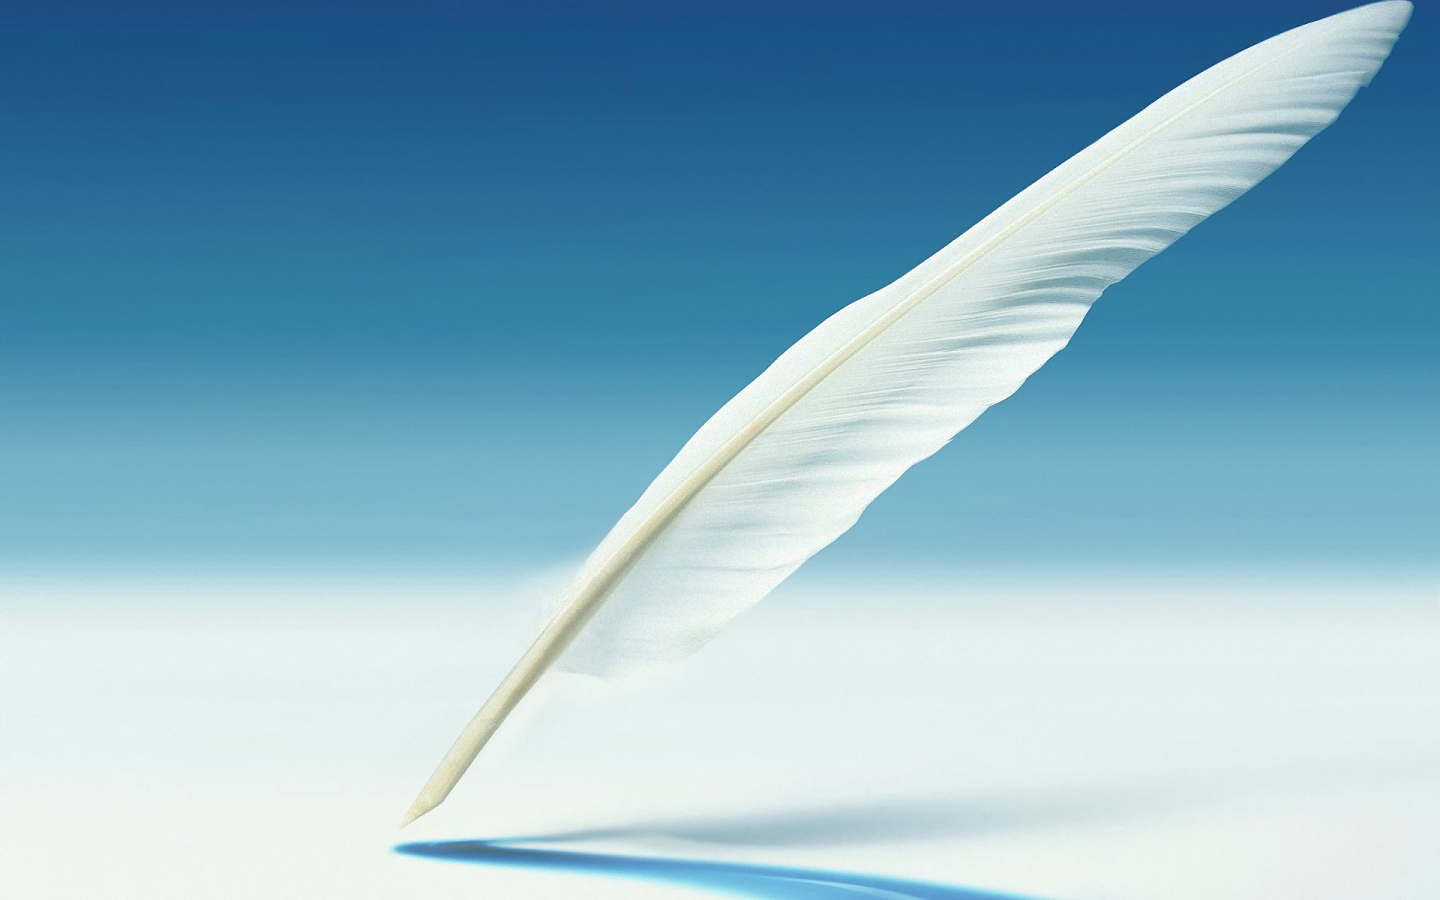 Feather Pen for 1440 x 900 widescreen resolution